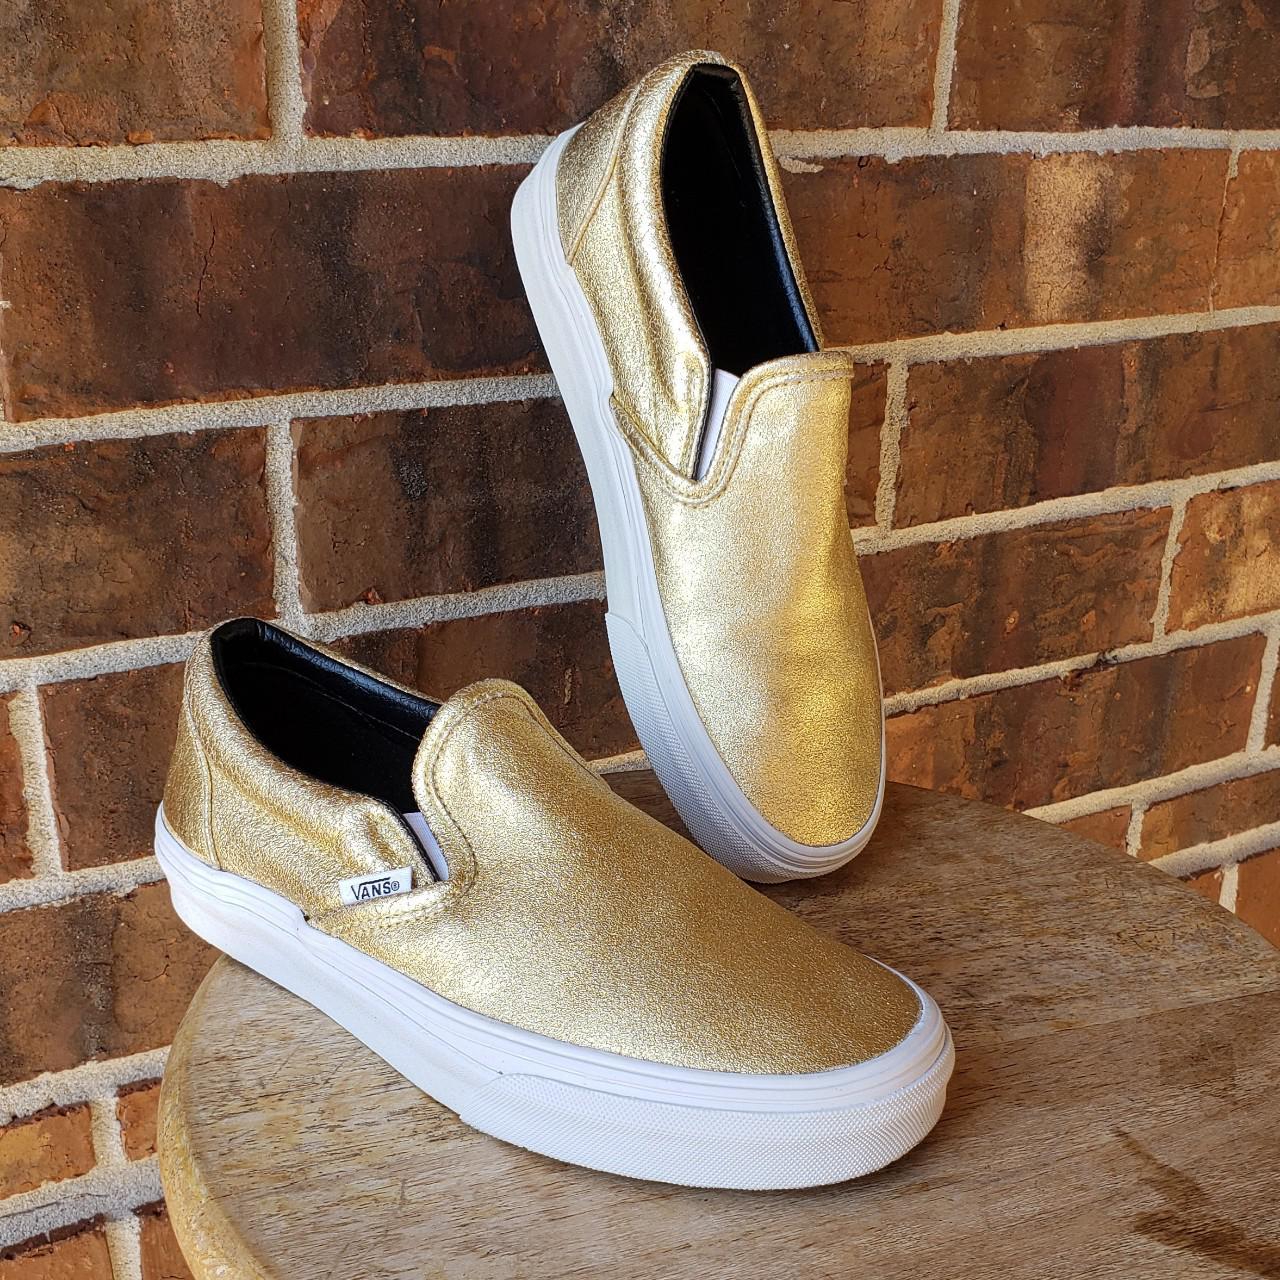 Vans Women's White and Gold Trainers